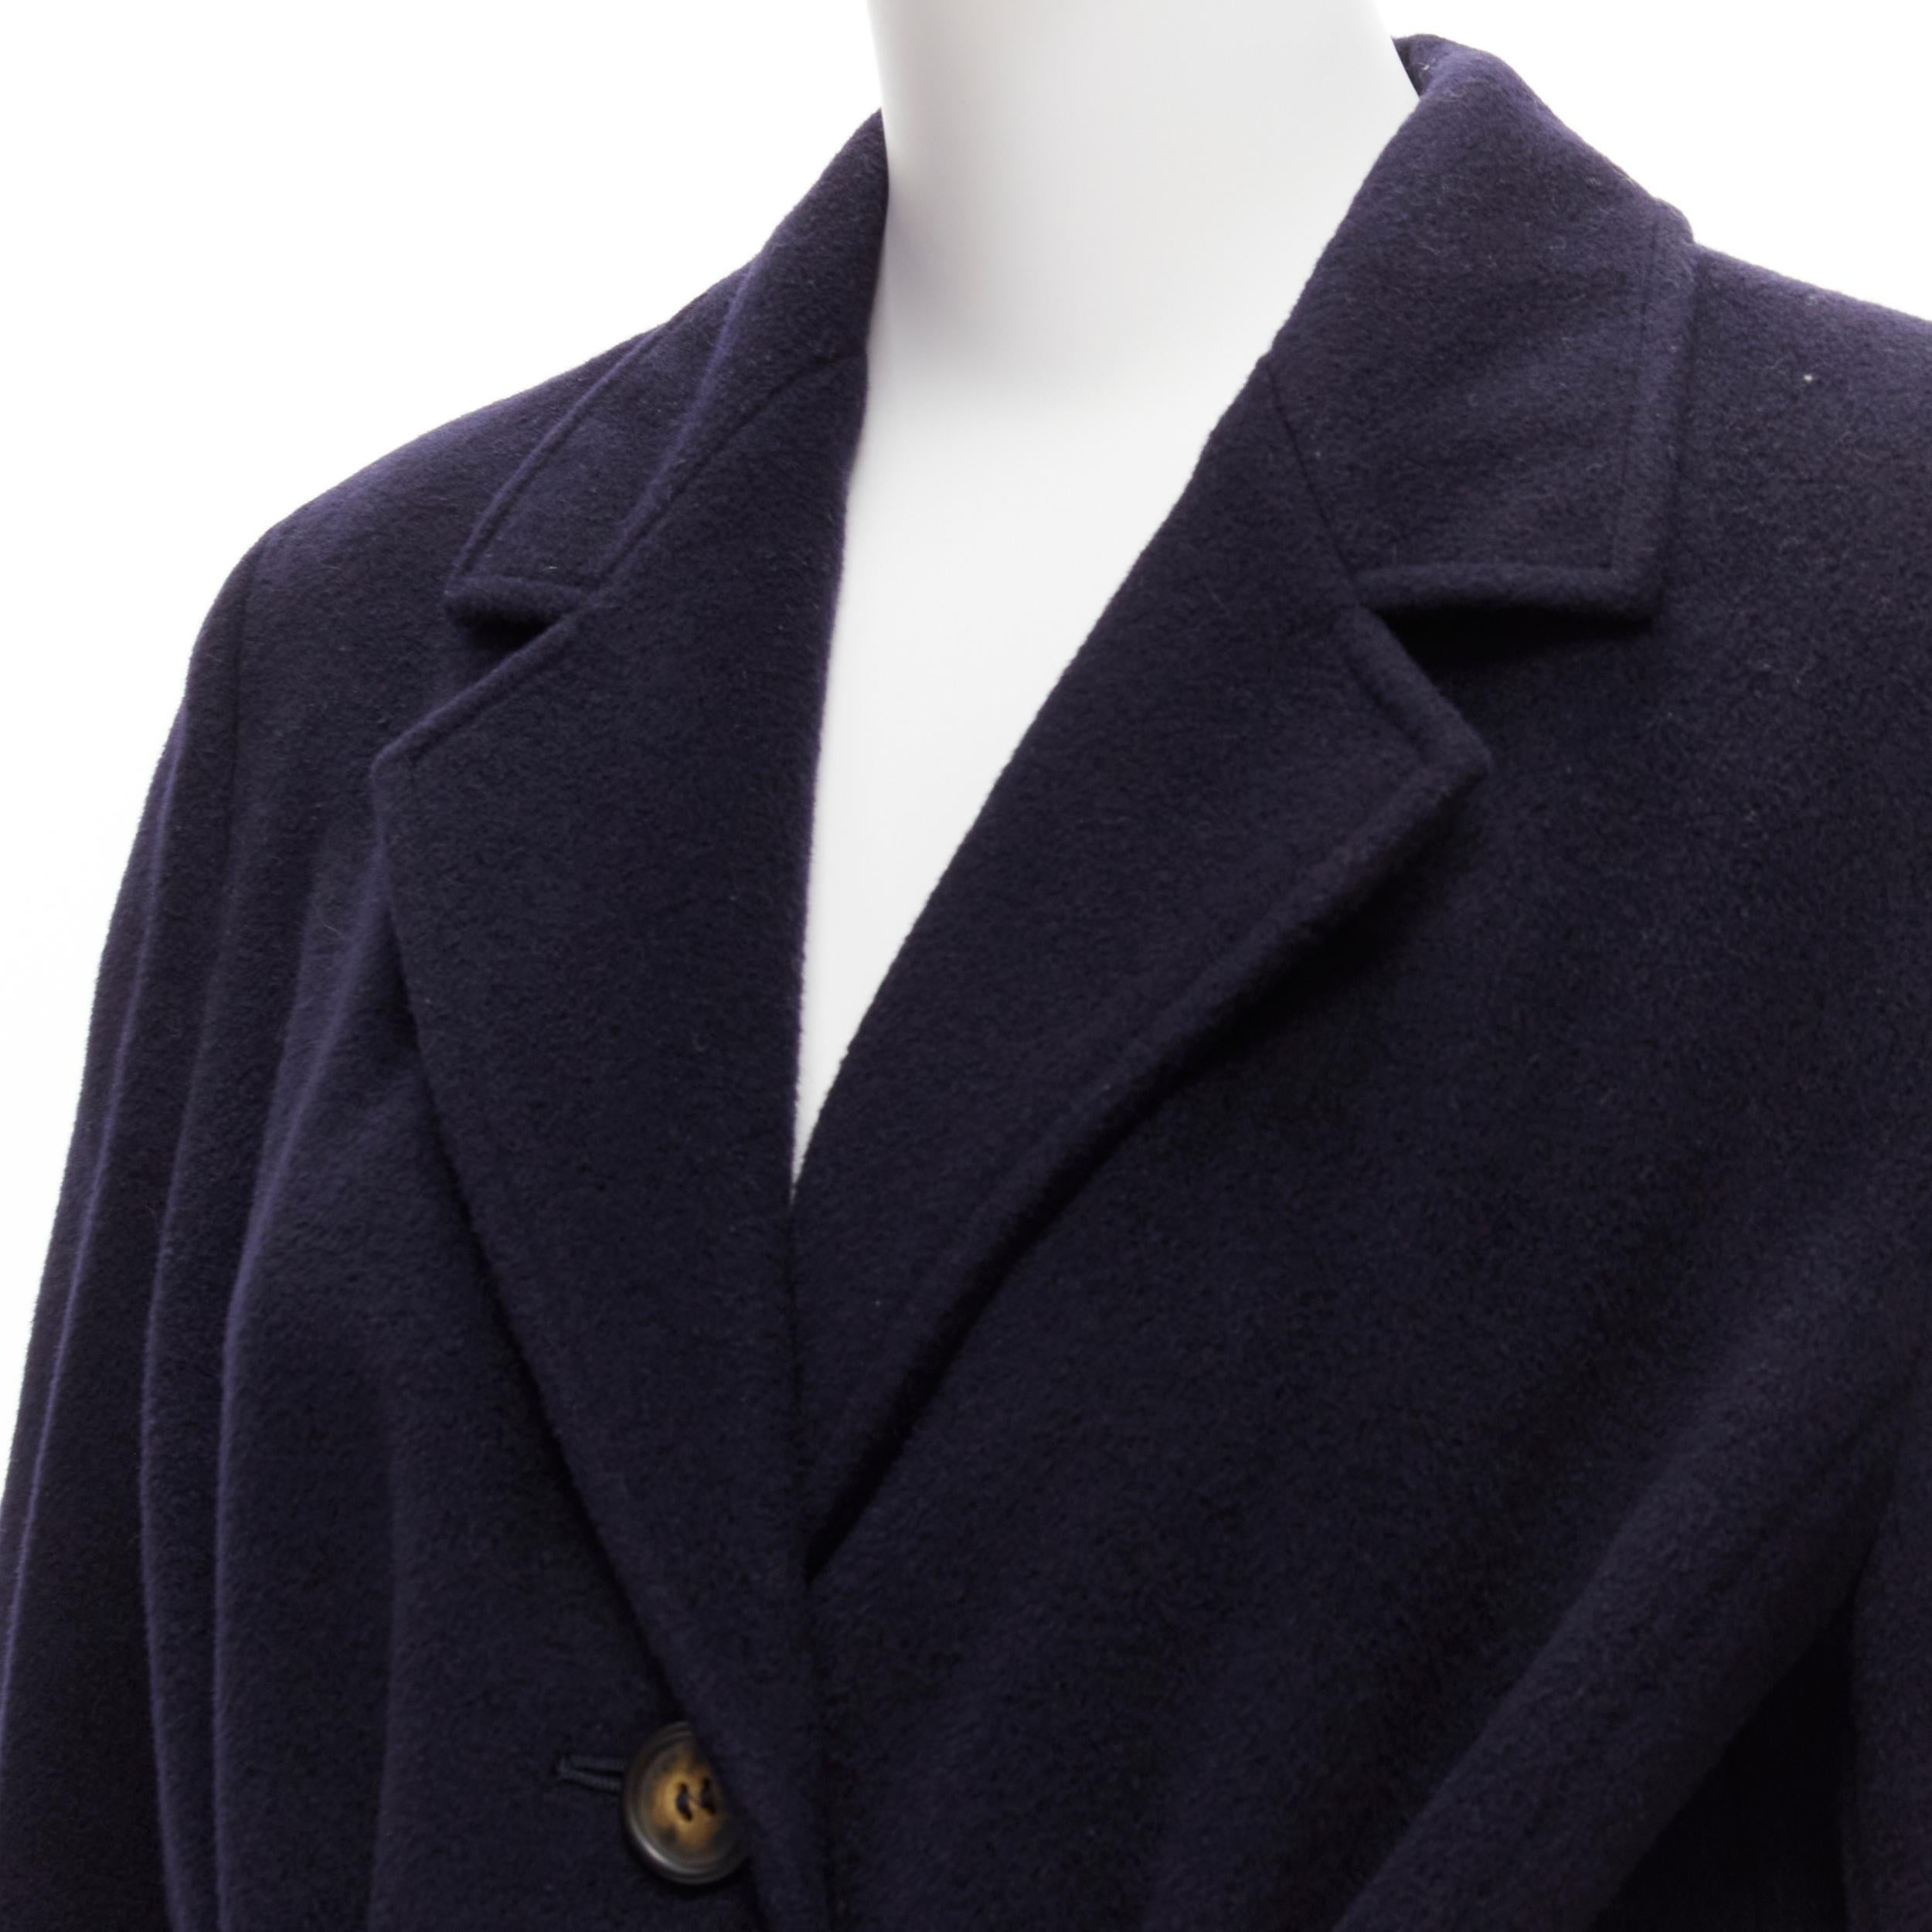 MAX MARA dark navy 100% virgin wool belted longline robe coat IT42 M
Reference: TGAS/D00097
Brand: Max Mara
Material: Virgin Wool
Color: Navy
Pattern: Solid
Closure: Button
Lining: Black Fabric
Made in: Italy

CONDITION:
Condition: Excellent, this